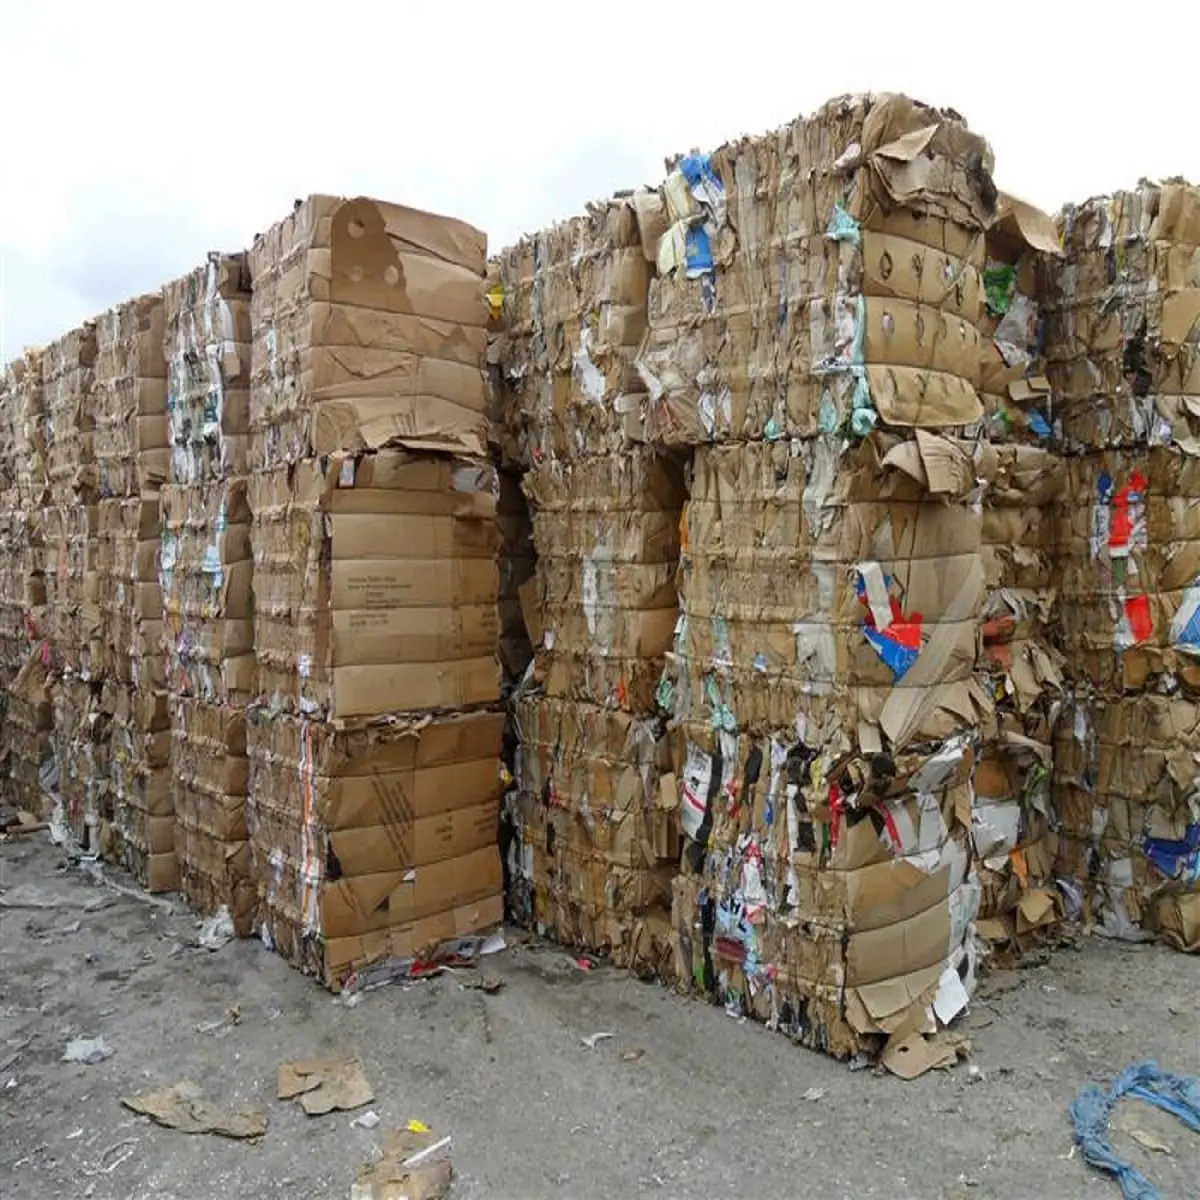 Top Quality Pure OCC Waste Paper /OCC 11 and OCC 12 / Old Corrugated Carton Waste Paper Scraps For Sale At Cheapest Wholesale